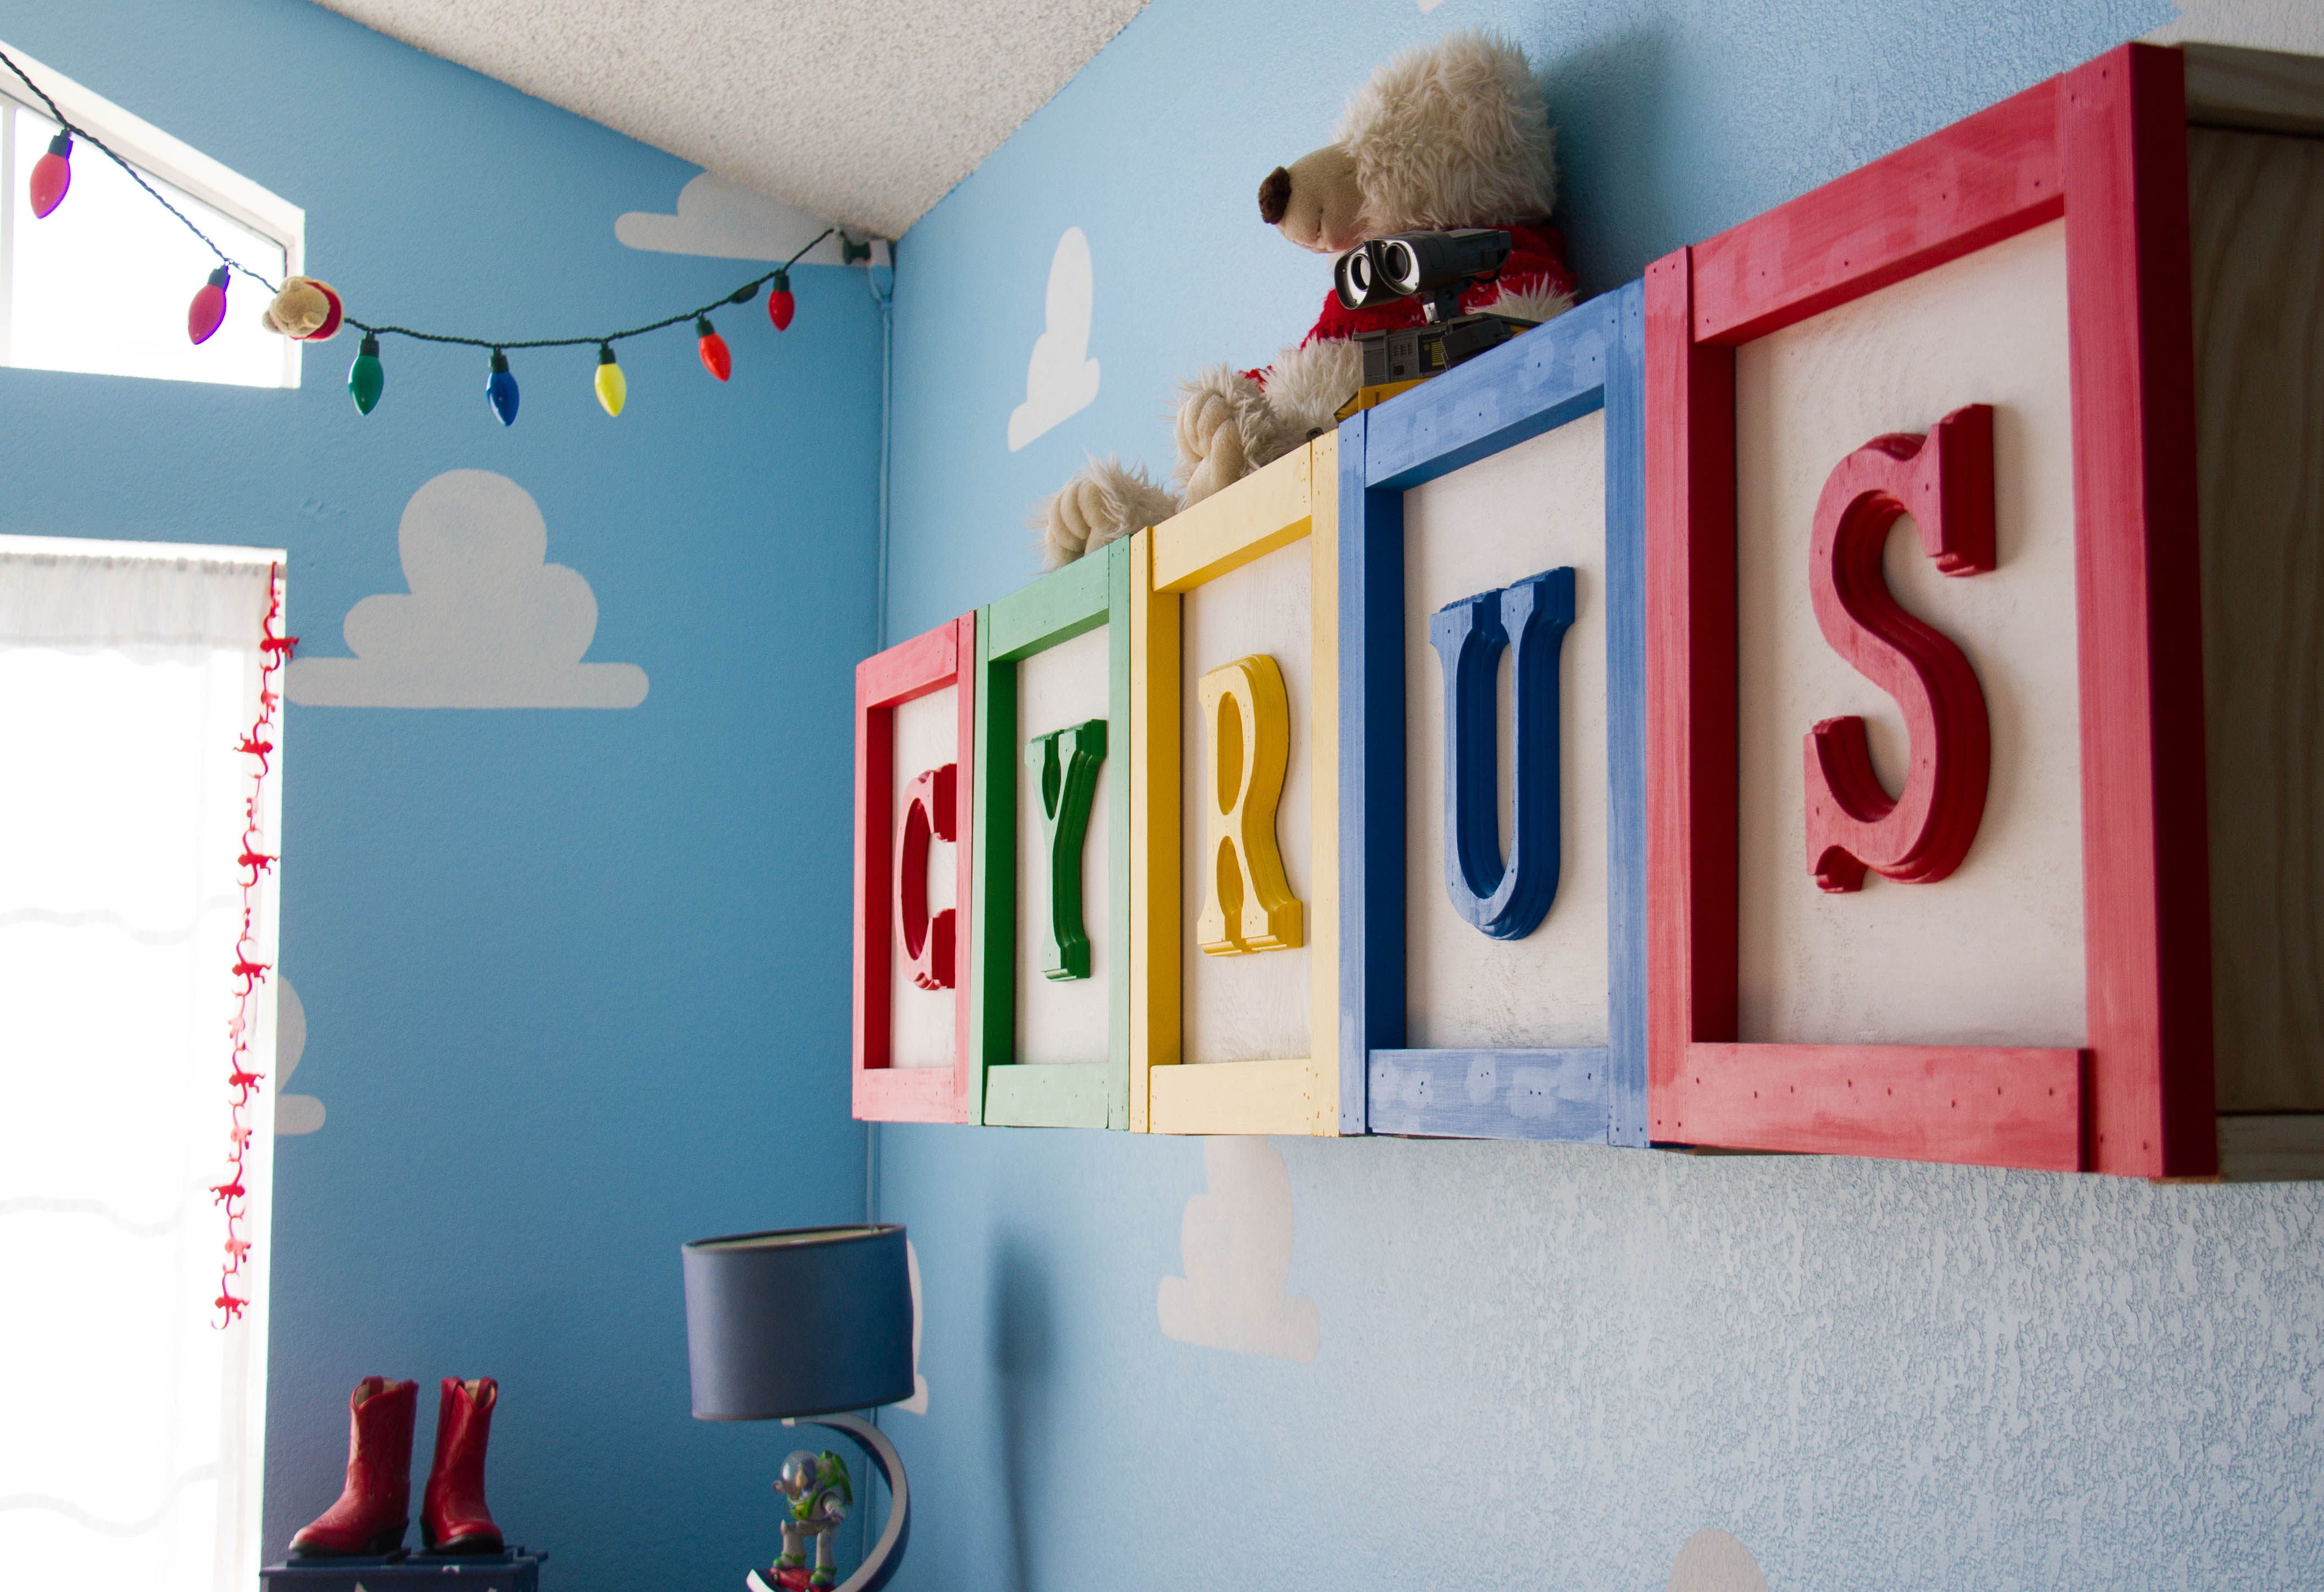 toy story themed room